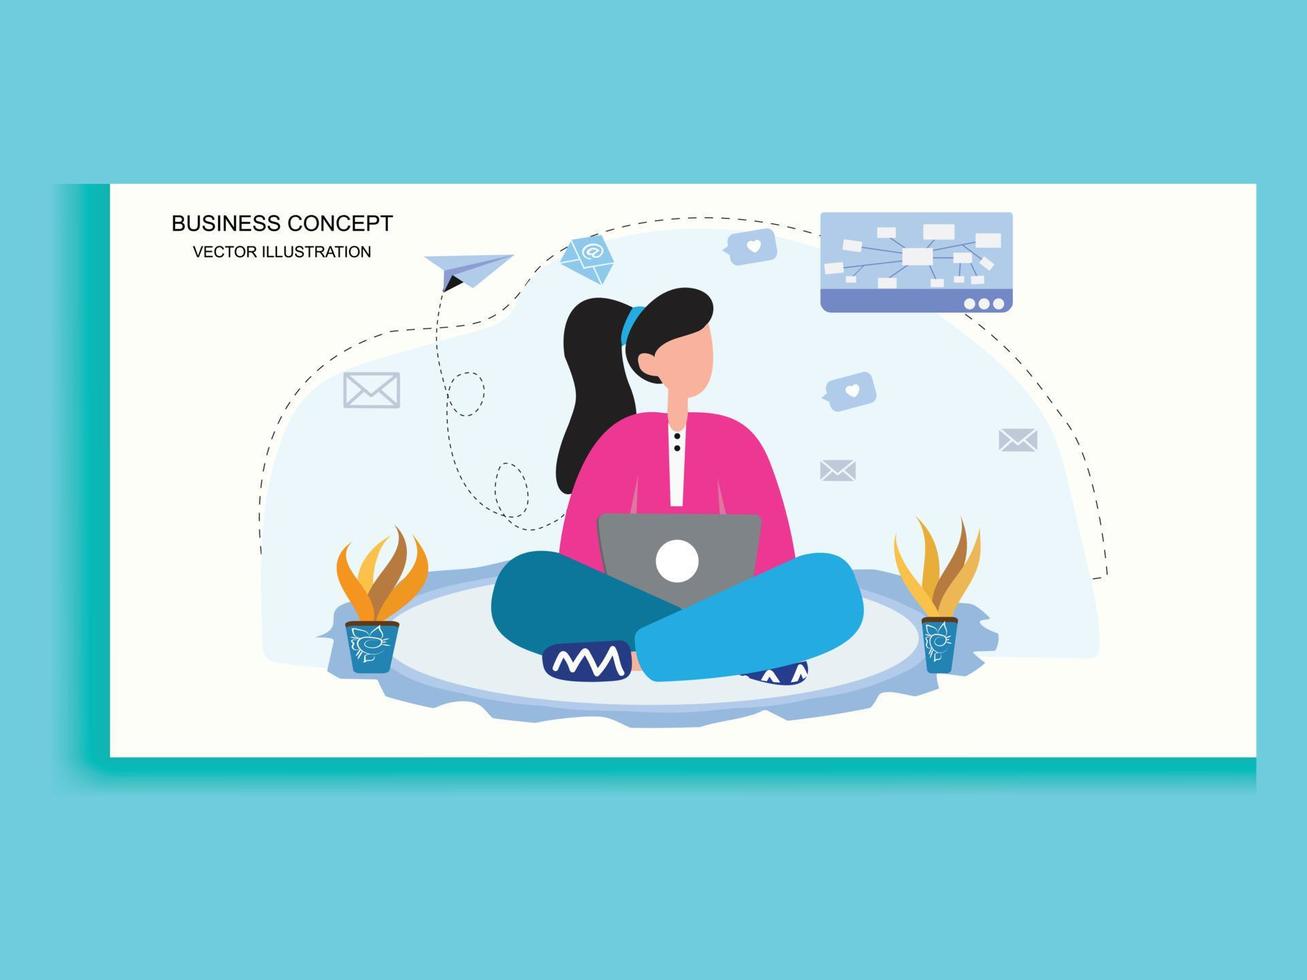 Yong woman sitting cross-legged and working ladder to success and progress, Vector illustration in flat design style with business concept.